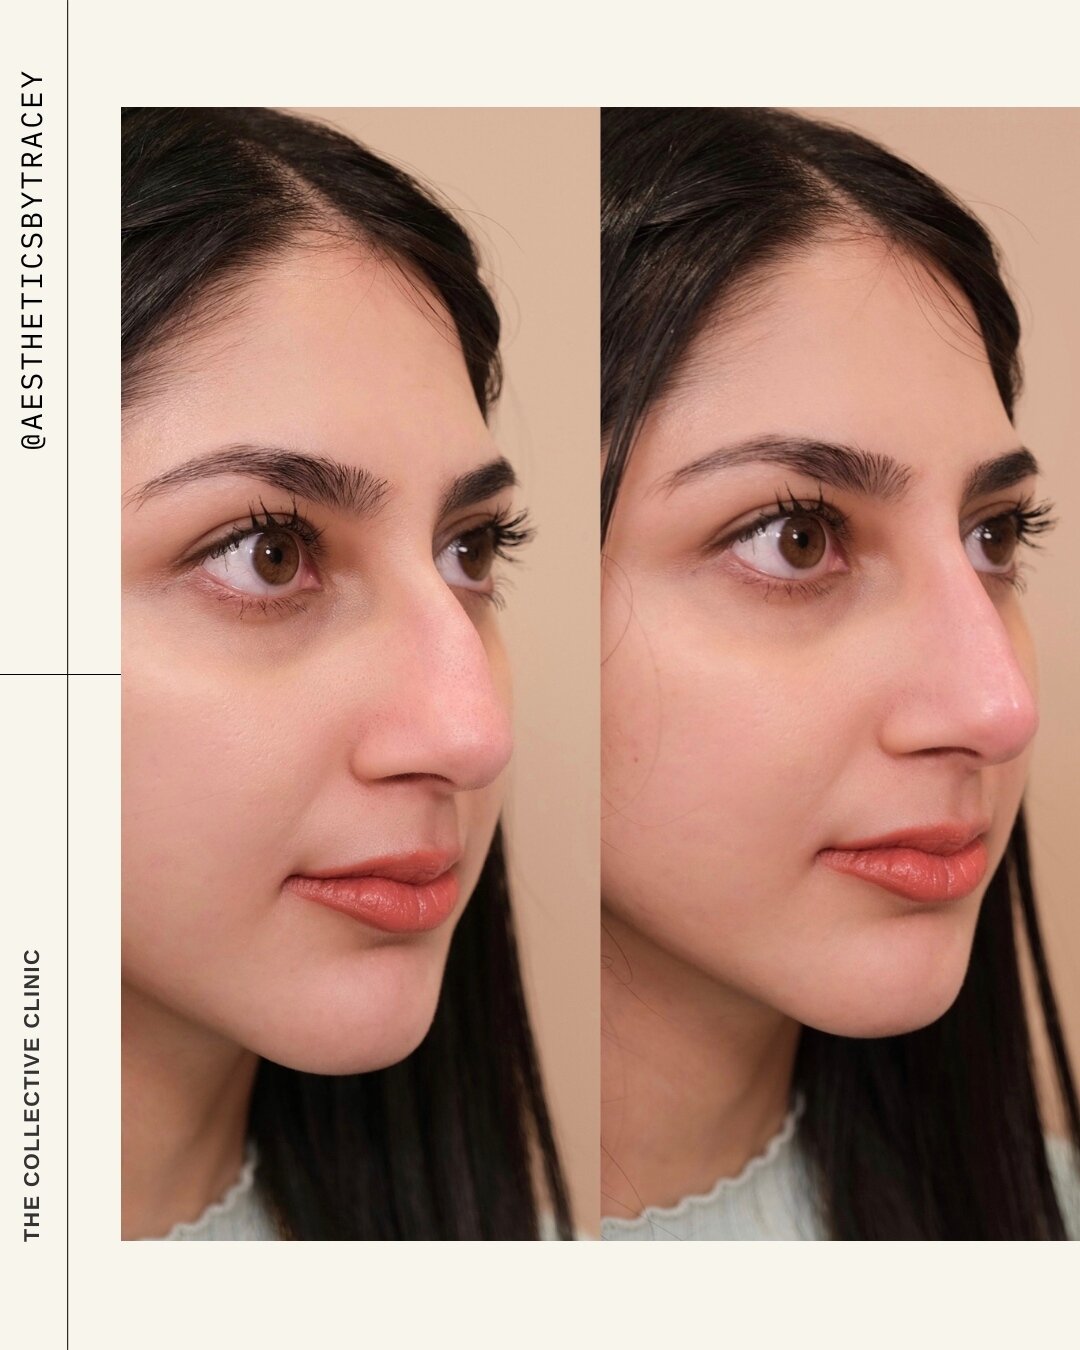 Have you been thinking about nose filler? 👃🏼⁠
⁠
Nose filler AKA non-surgical rhinoplasty or liquid rhinoplasty, is a cosmetic injectable procedure where dermal fillers are injected into the nose to reshape and enhance its appearance to address mino